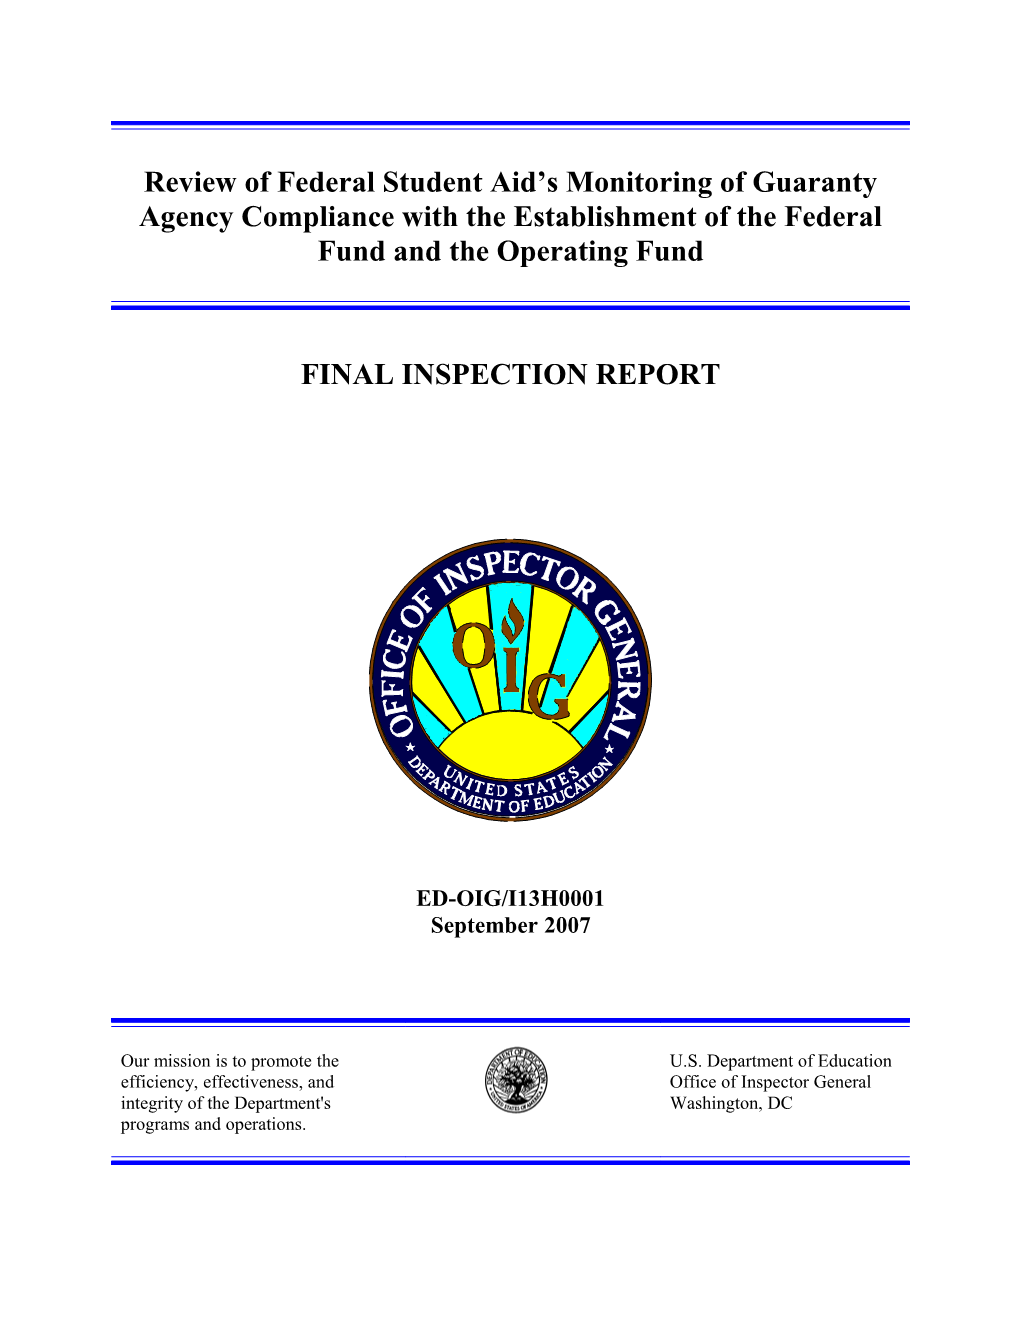 Review of Federal Student Aid S Monitoring of Guaranty Agency Compliance with the Establishment